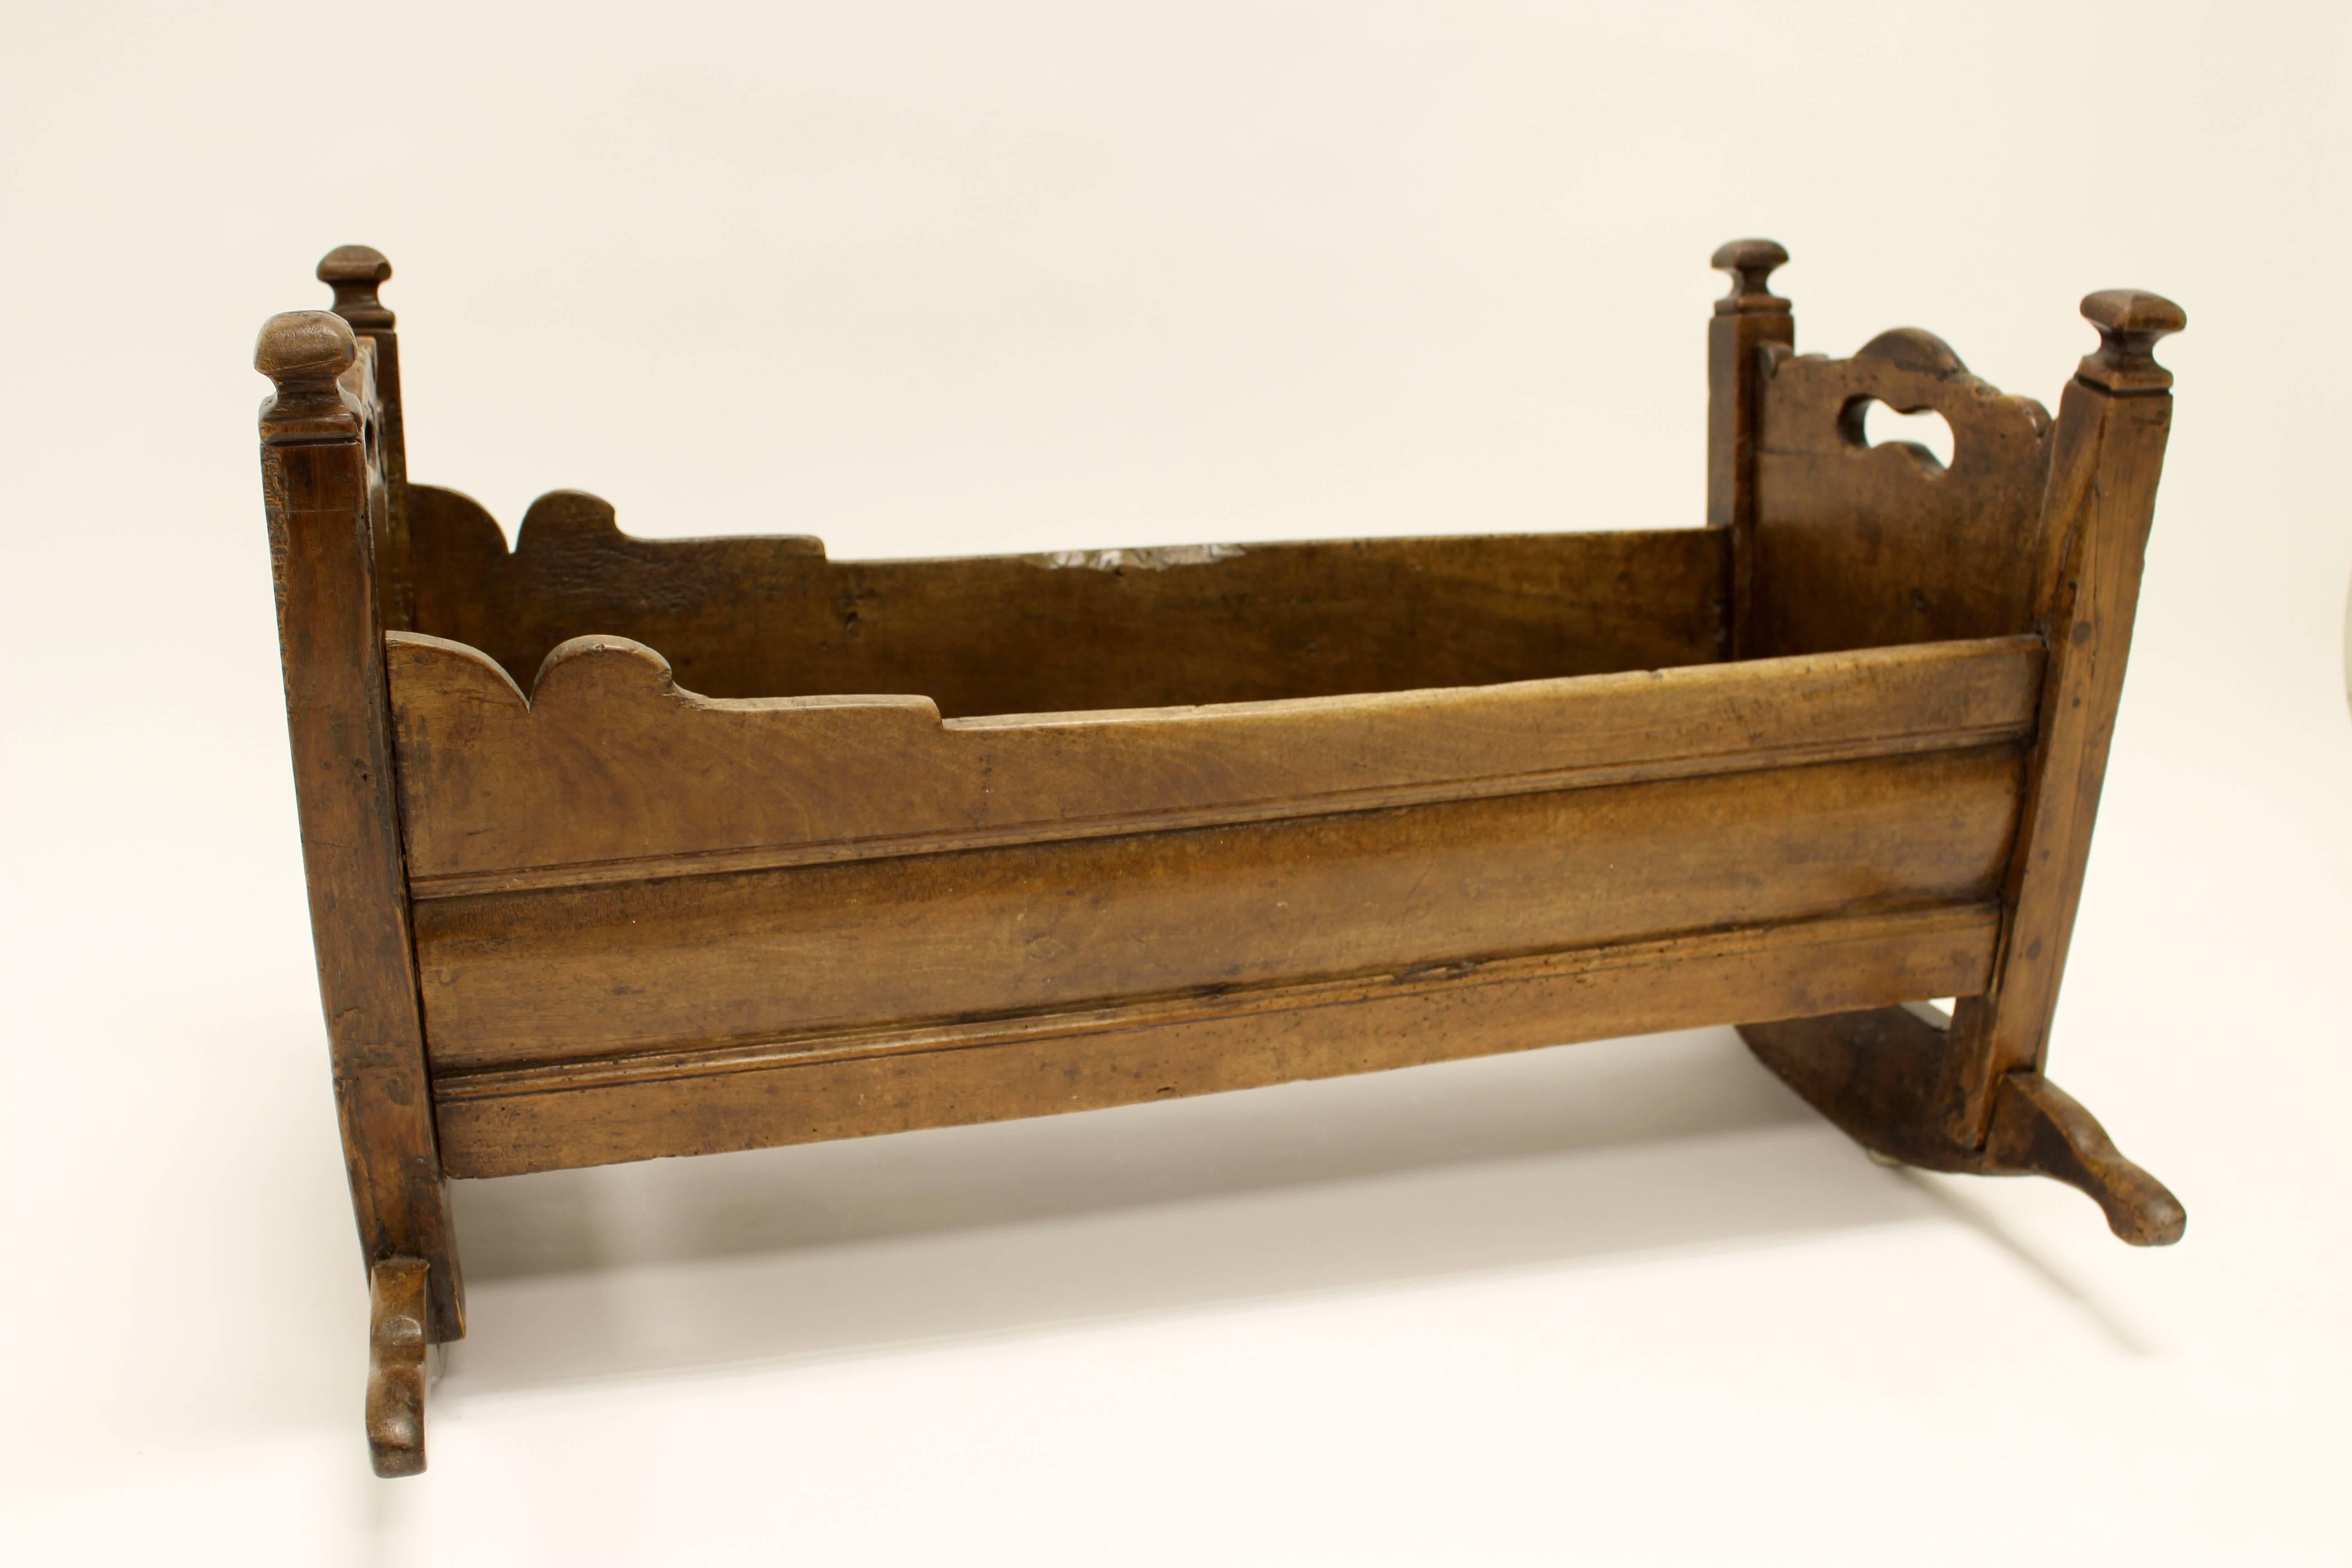 A unique and rare Italian walnut cradle signed. This example is formed in the traditional style with scalloped end boards surmounted by turret finials atop outstretched rockers. Lombardy, 18th century. 